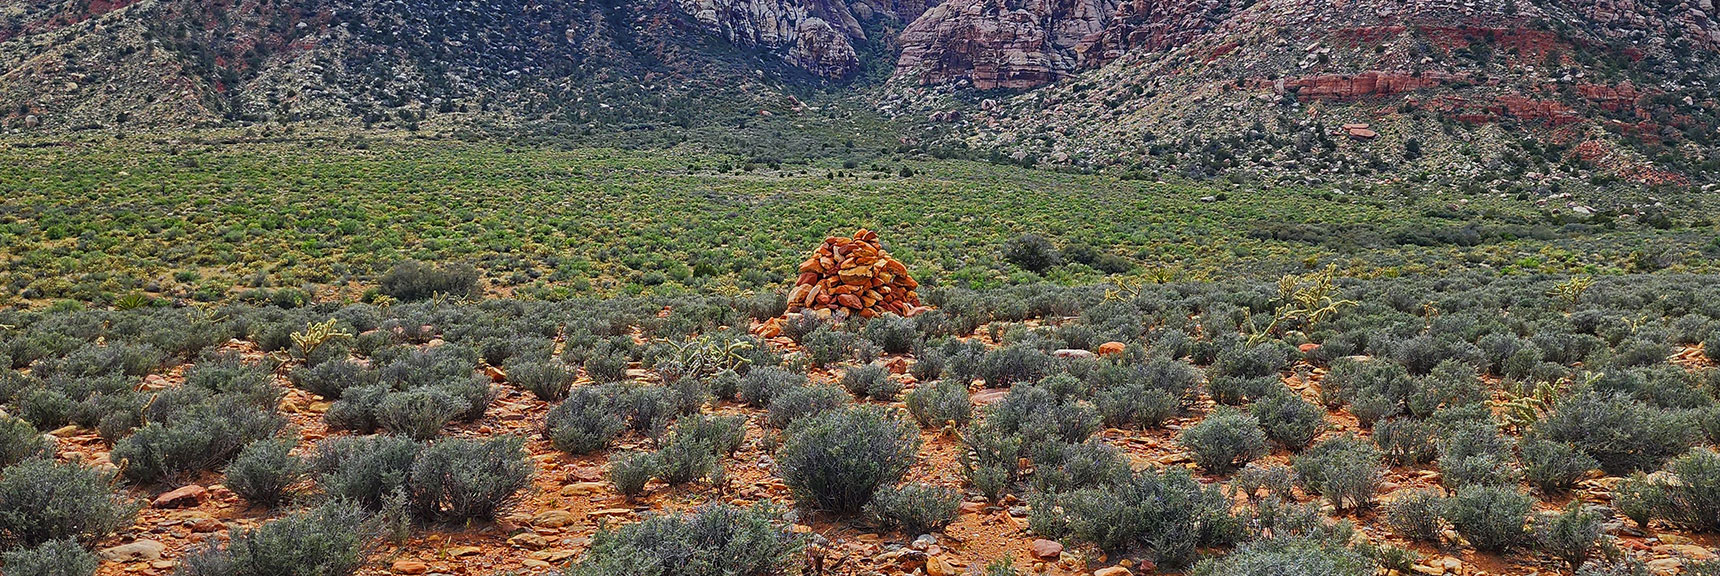 Closer View of That Cairn. Large Rocks Stacked About 6 Feet High. | Historic Roads in Red Rock Canyon, Nevada | David Smith | LasVegasAreaTrails.com